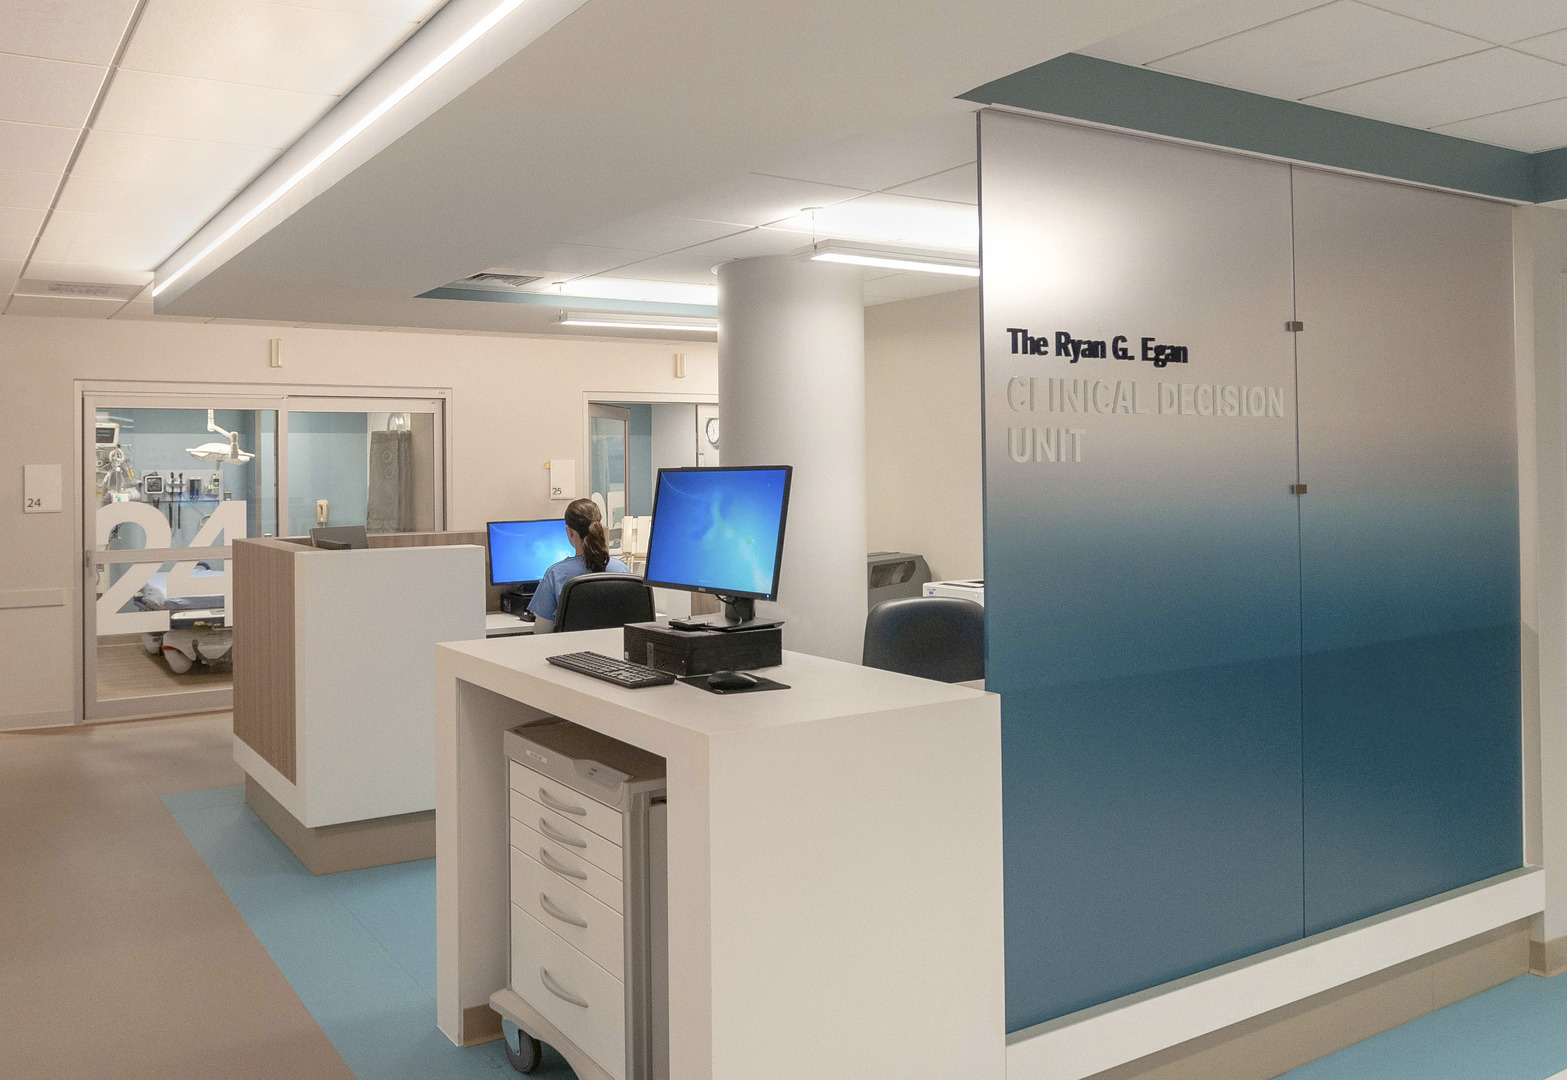 Newport Hospital Emergency Department Clinical Decision Unit check-in area with computers, drawers and equipment, plus an exam room in the background